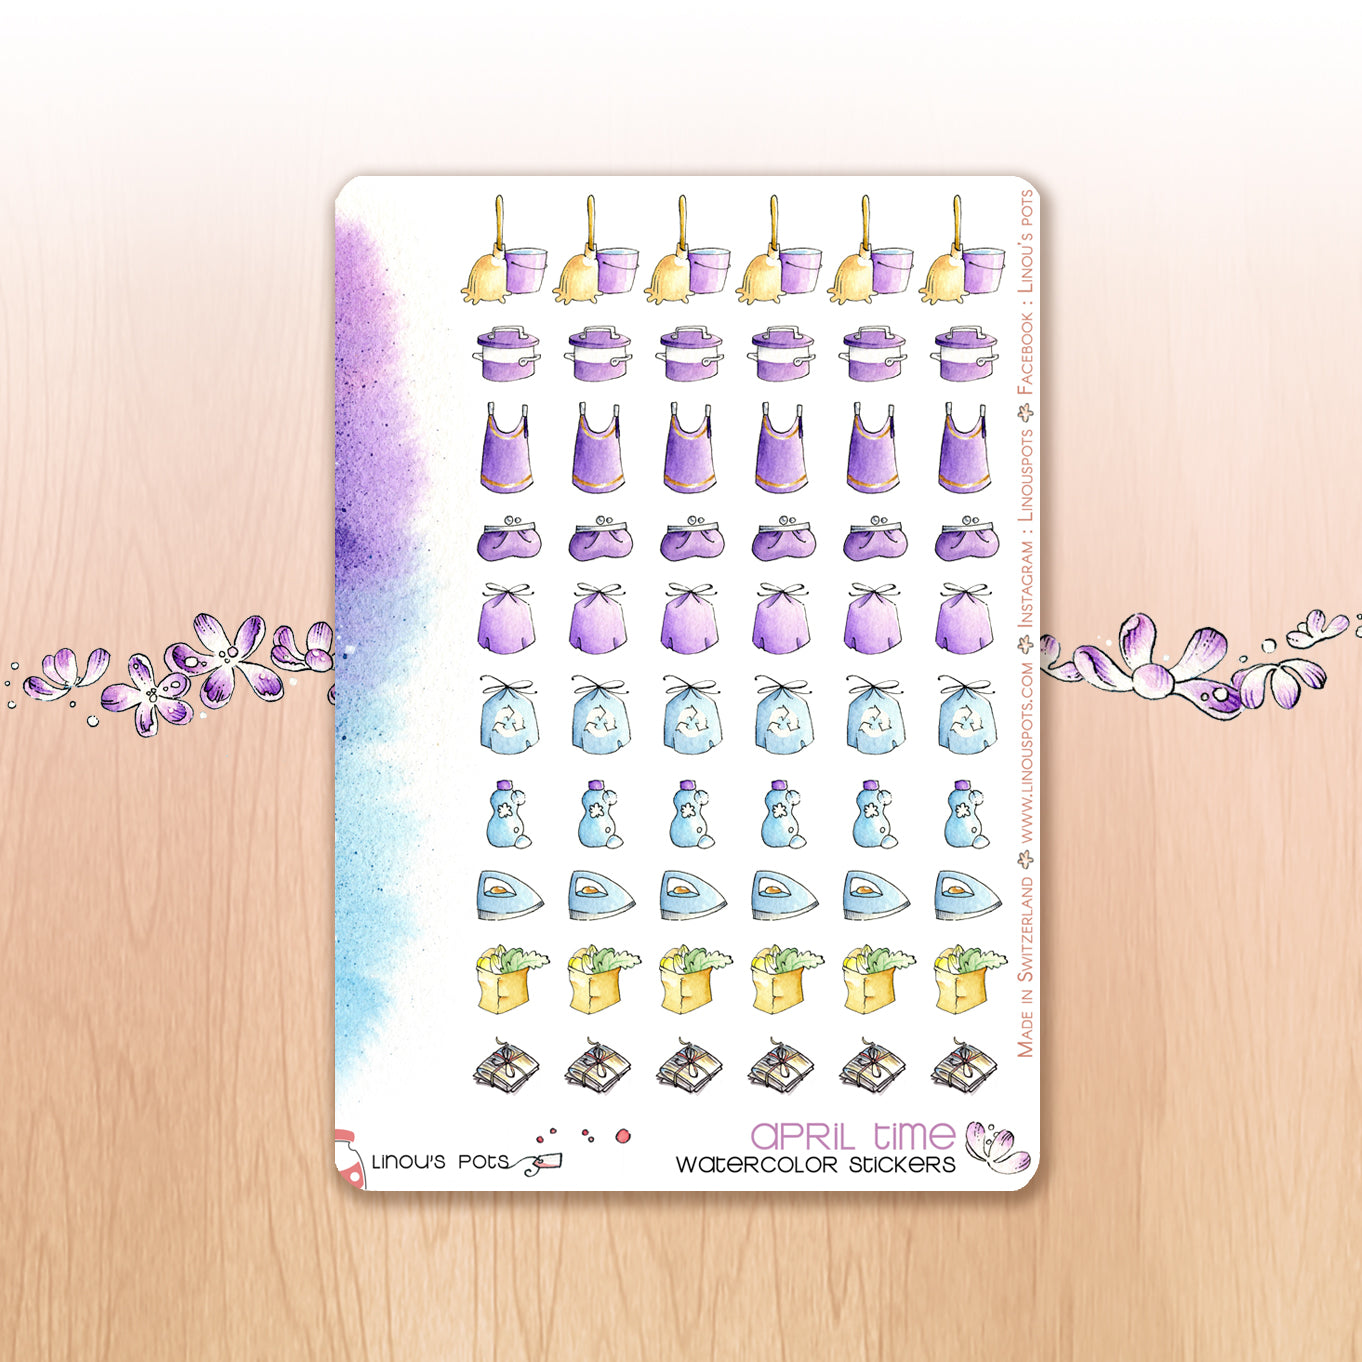 Buzzing In The Rain - Watercolor Planner stickers - House Chores